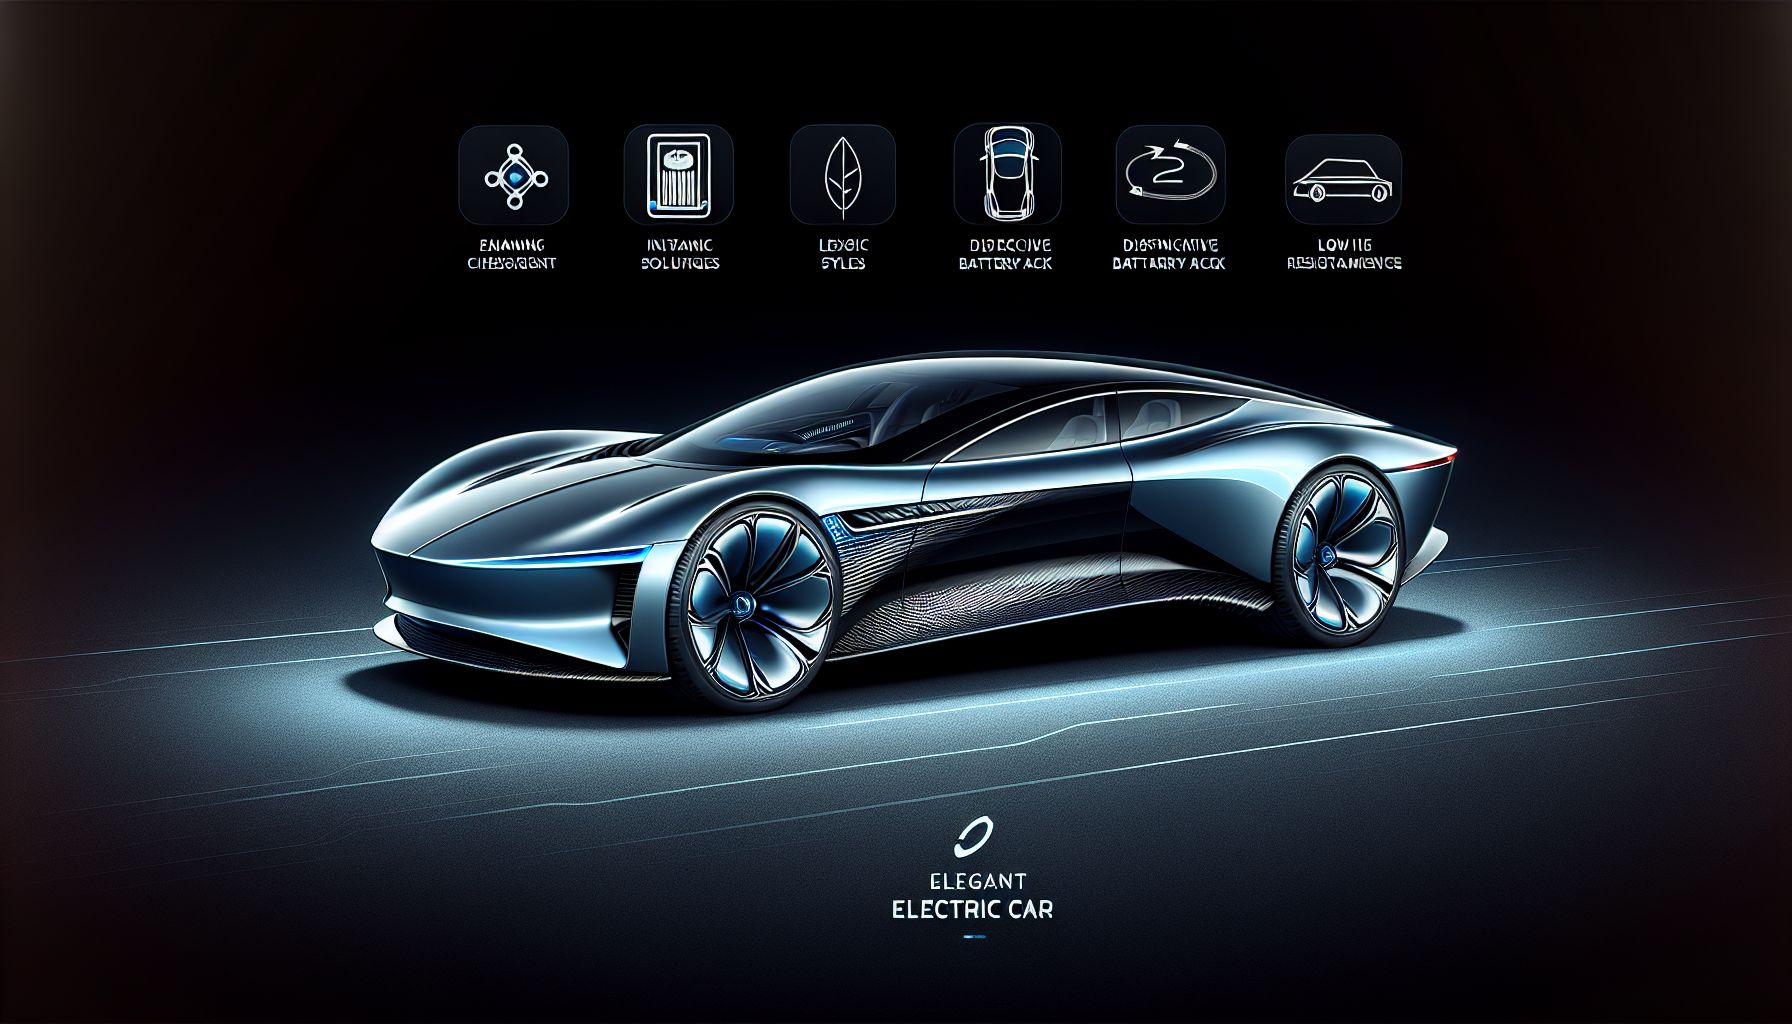 The elegance of the electric age: the BMW i4